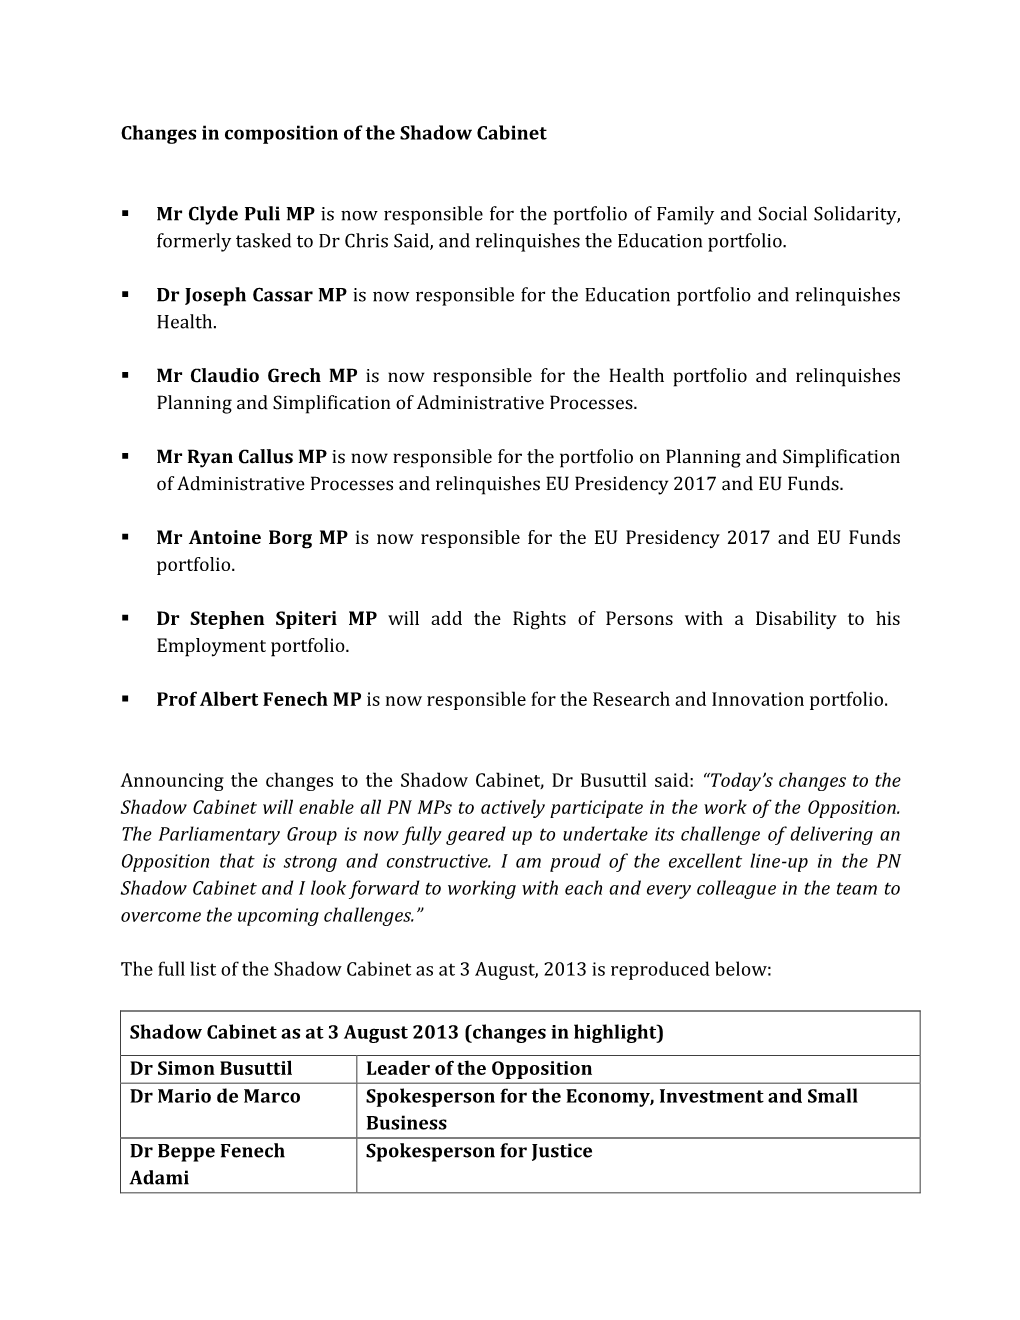 Changes in Composition of the Shadow Cabinet Mr Clyde Puli MP